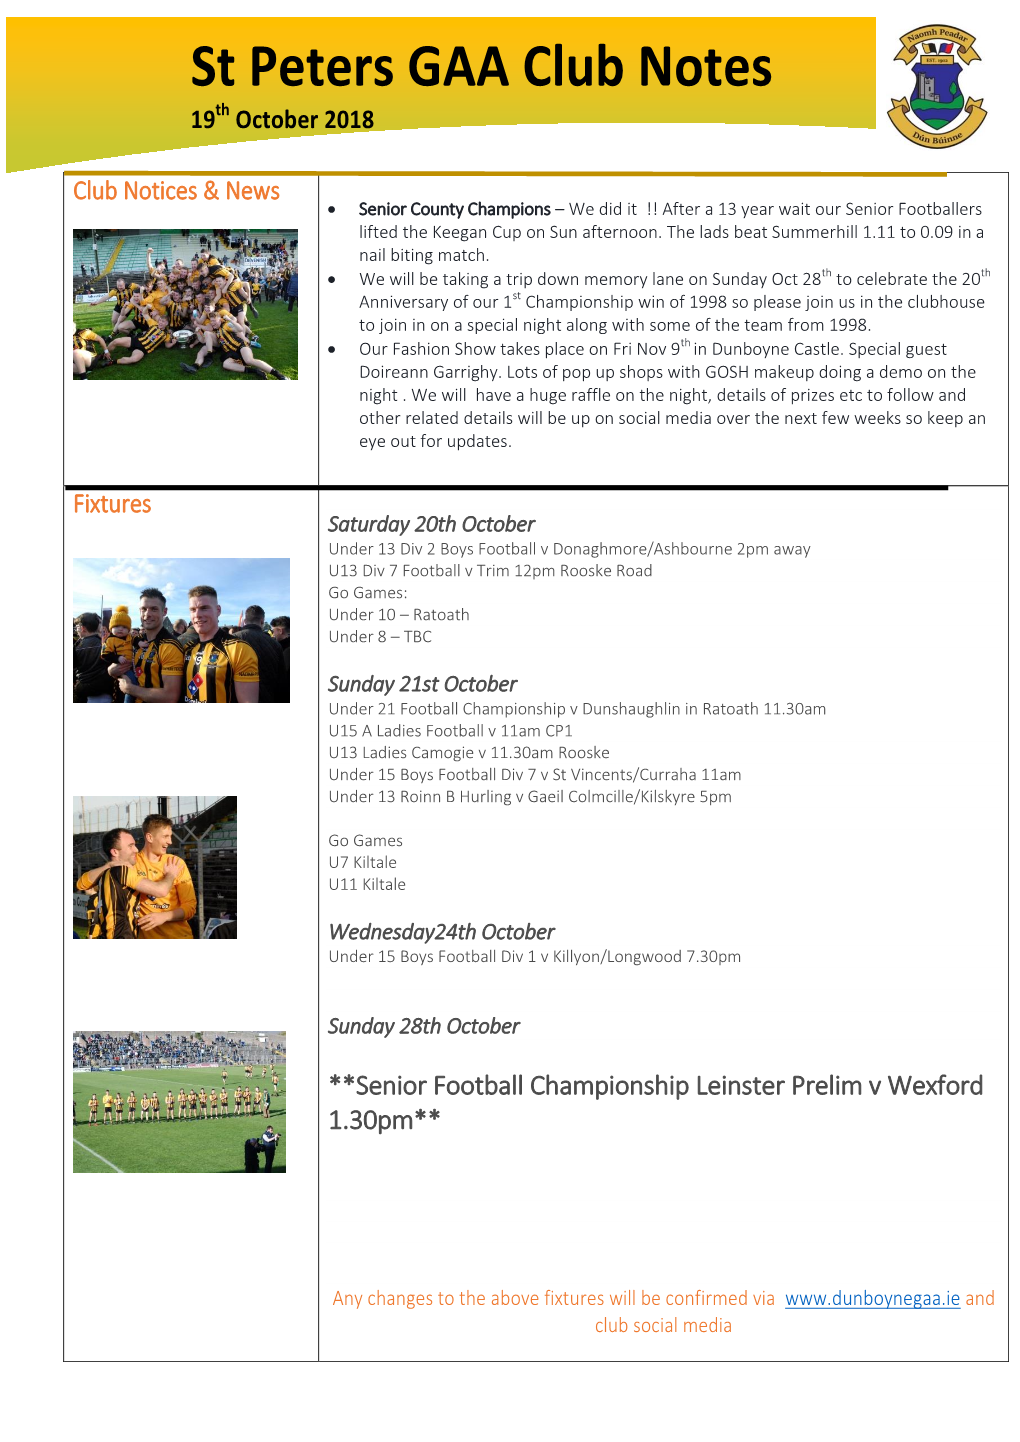 St Peters GAA Club Notes #] Th 19 October 2018